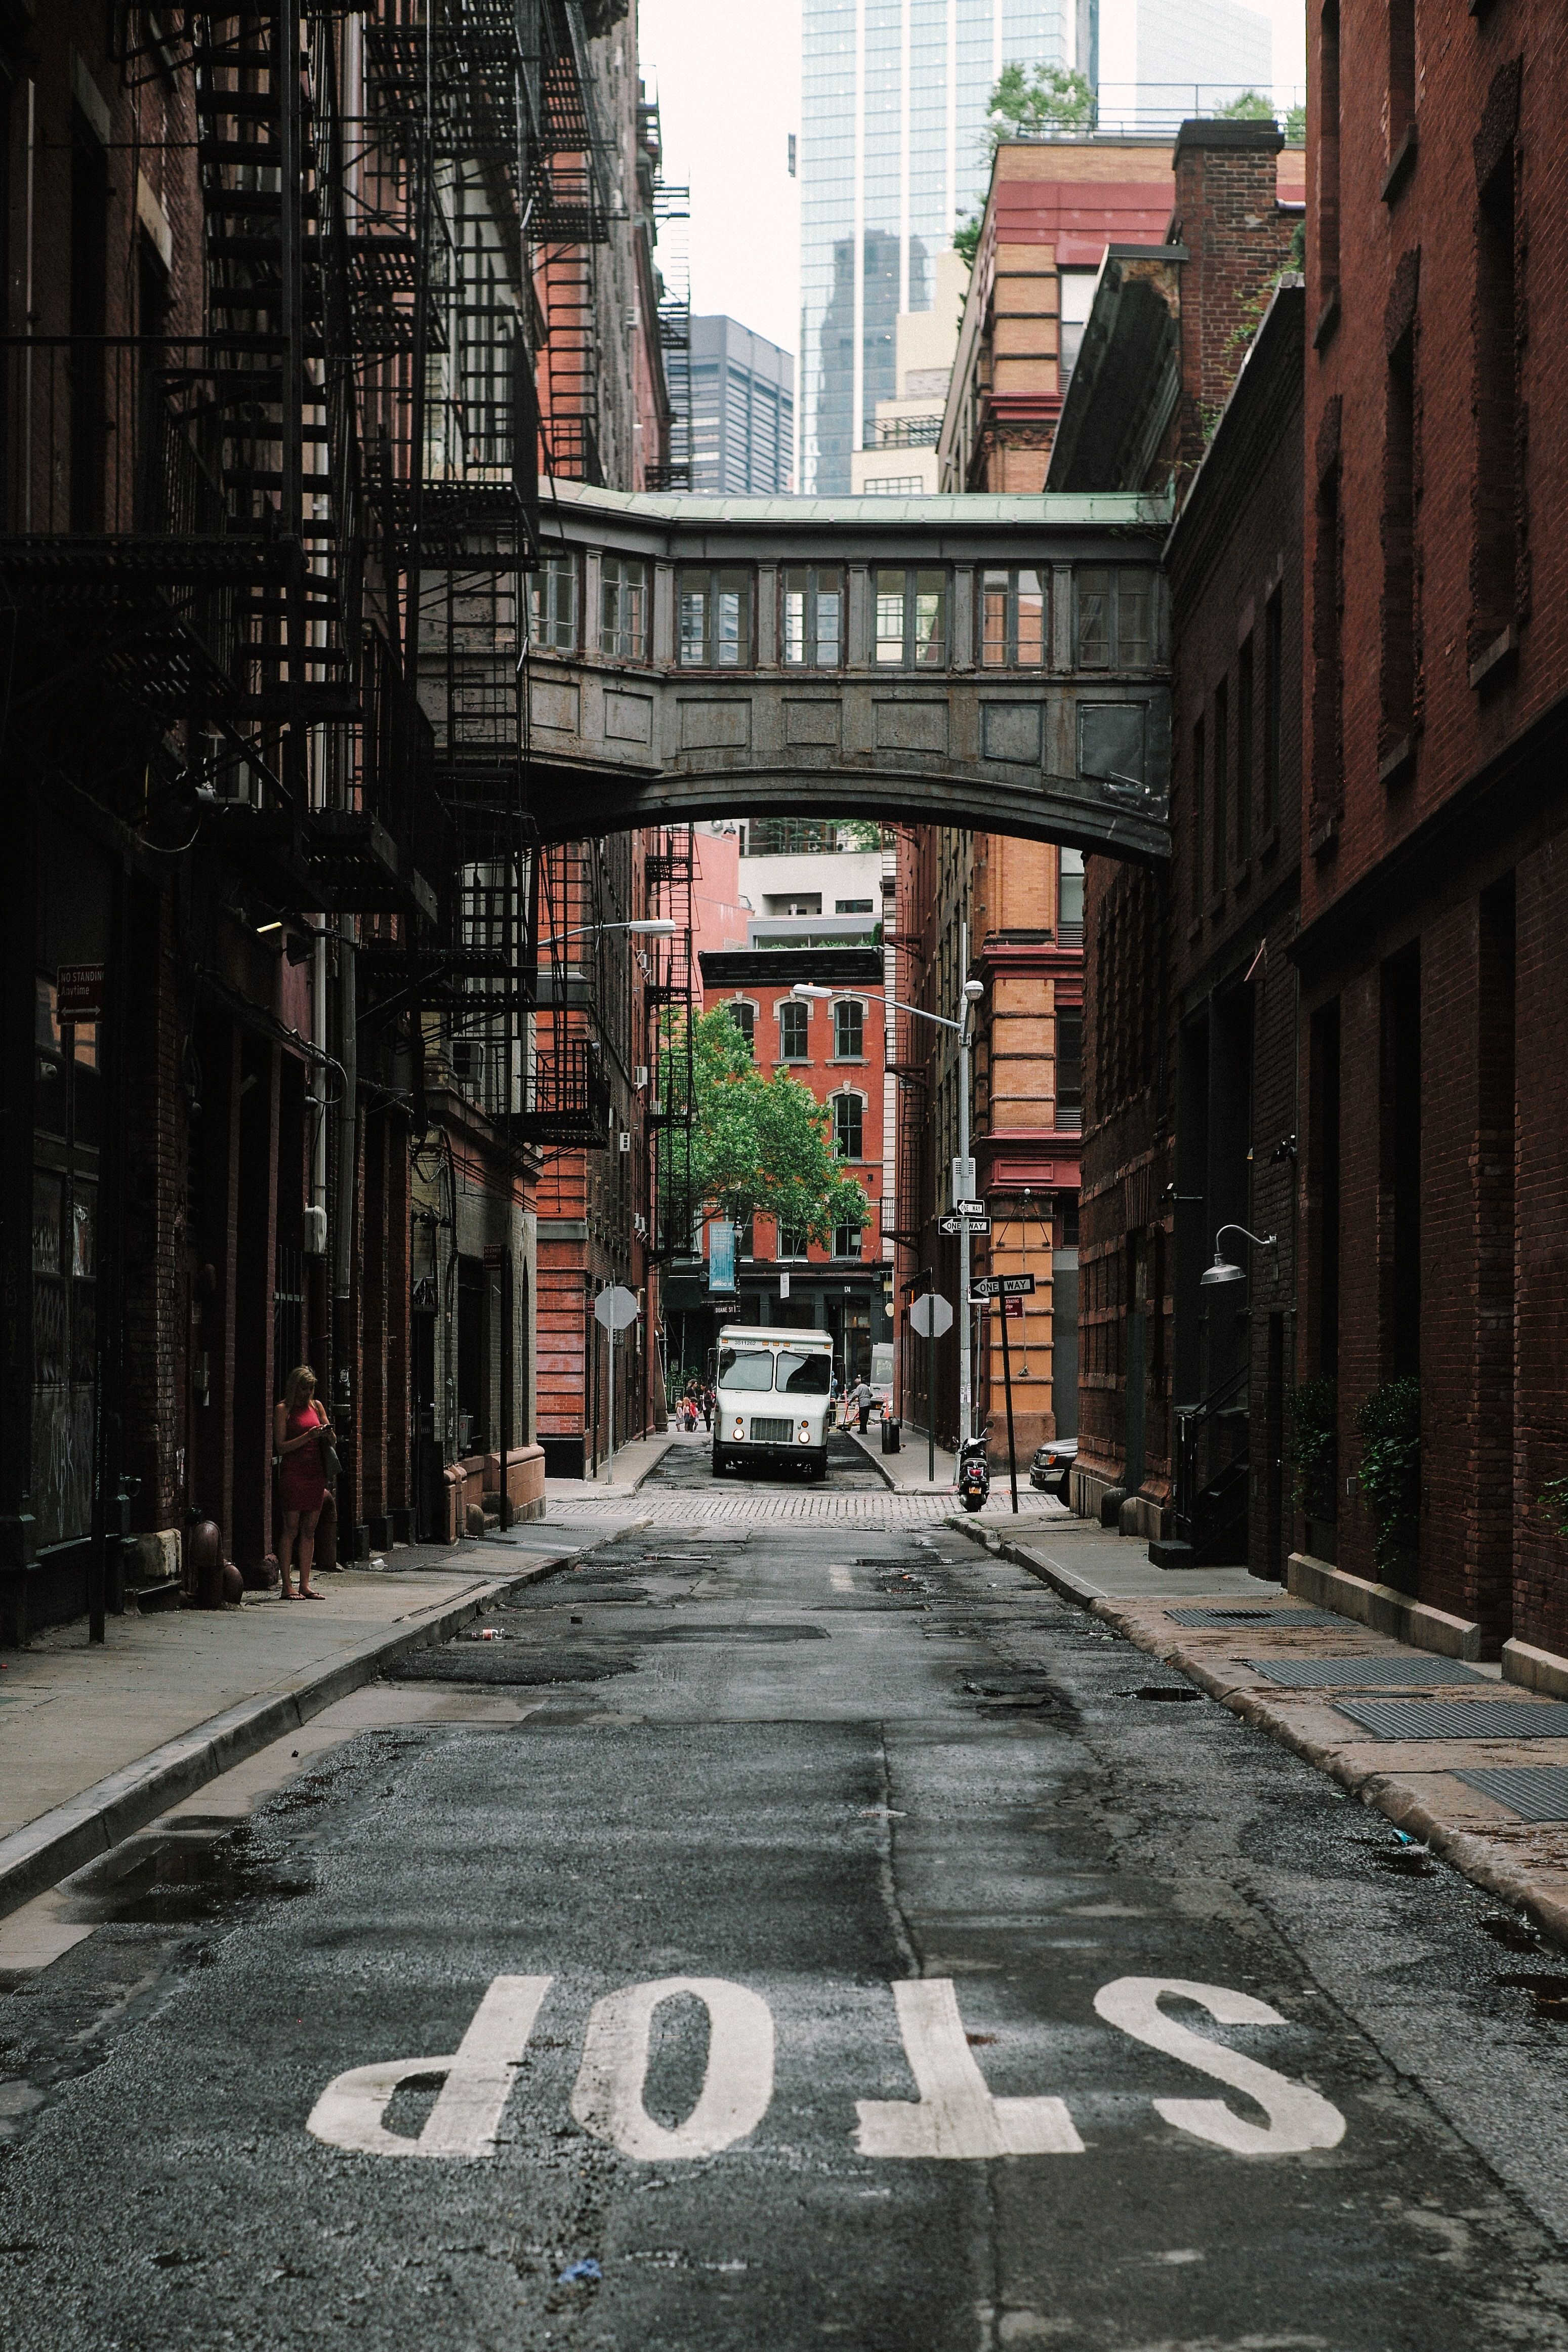 Every Tribeca alleyway tells a sweet story.